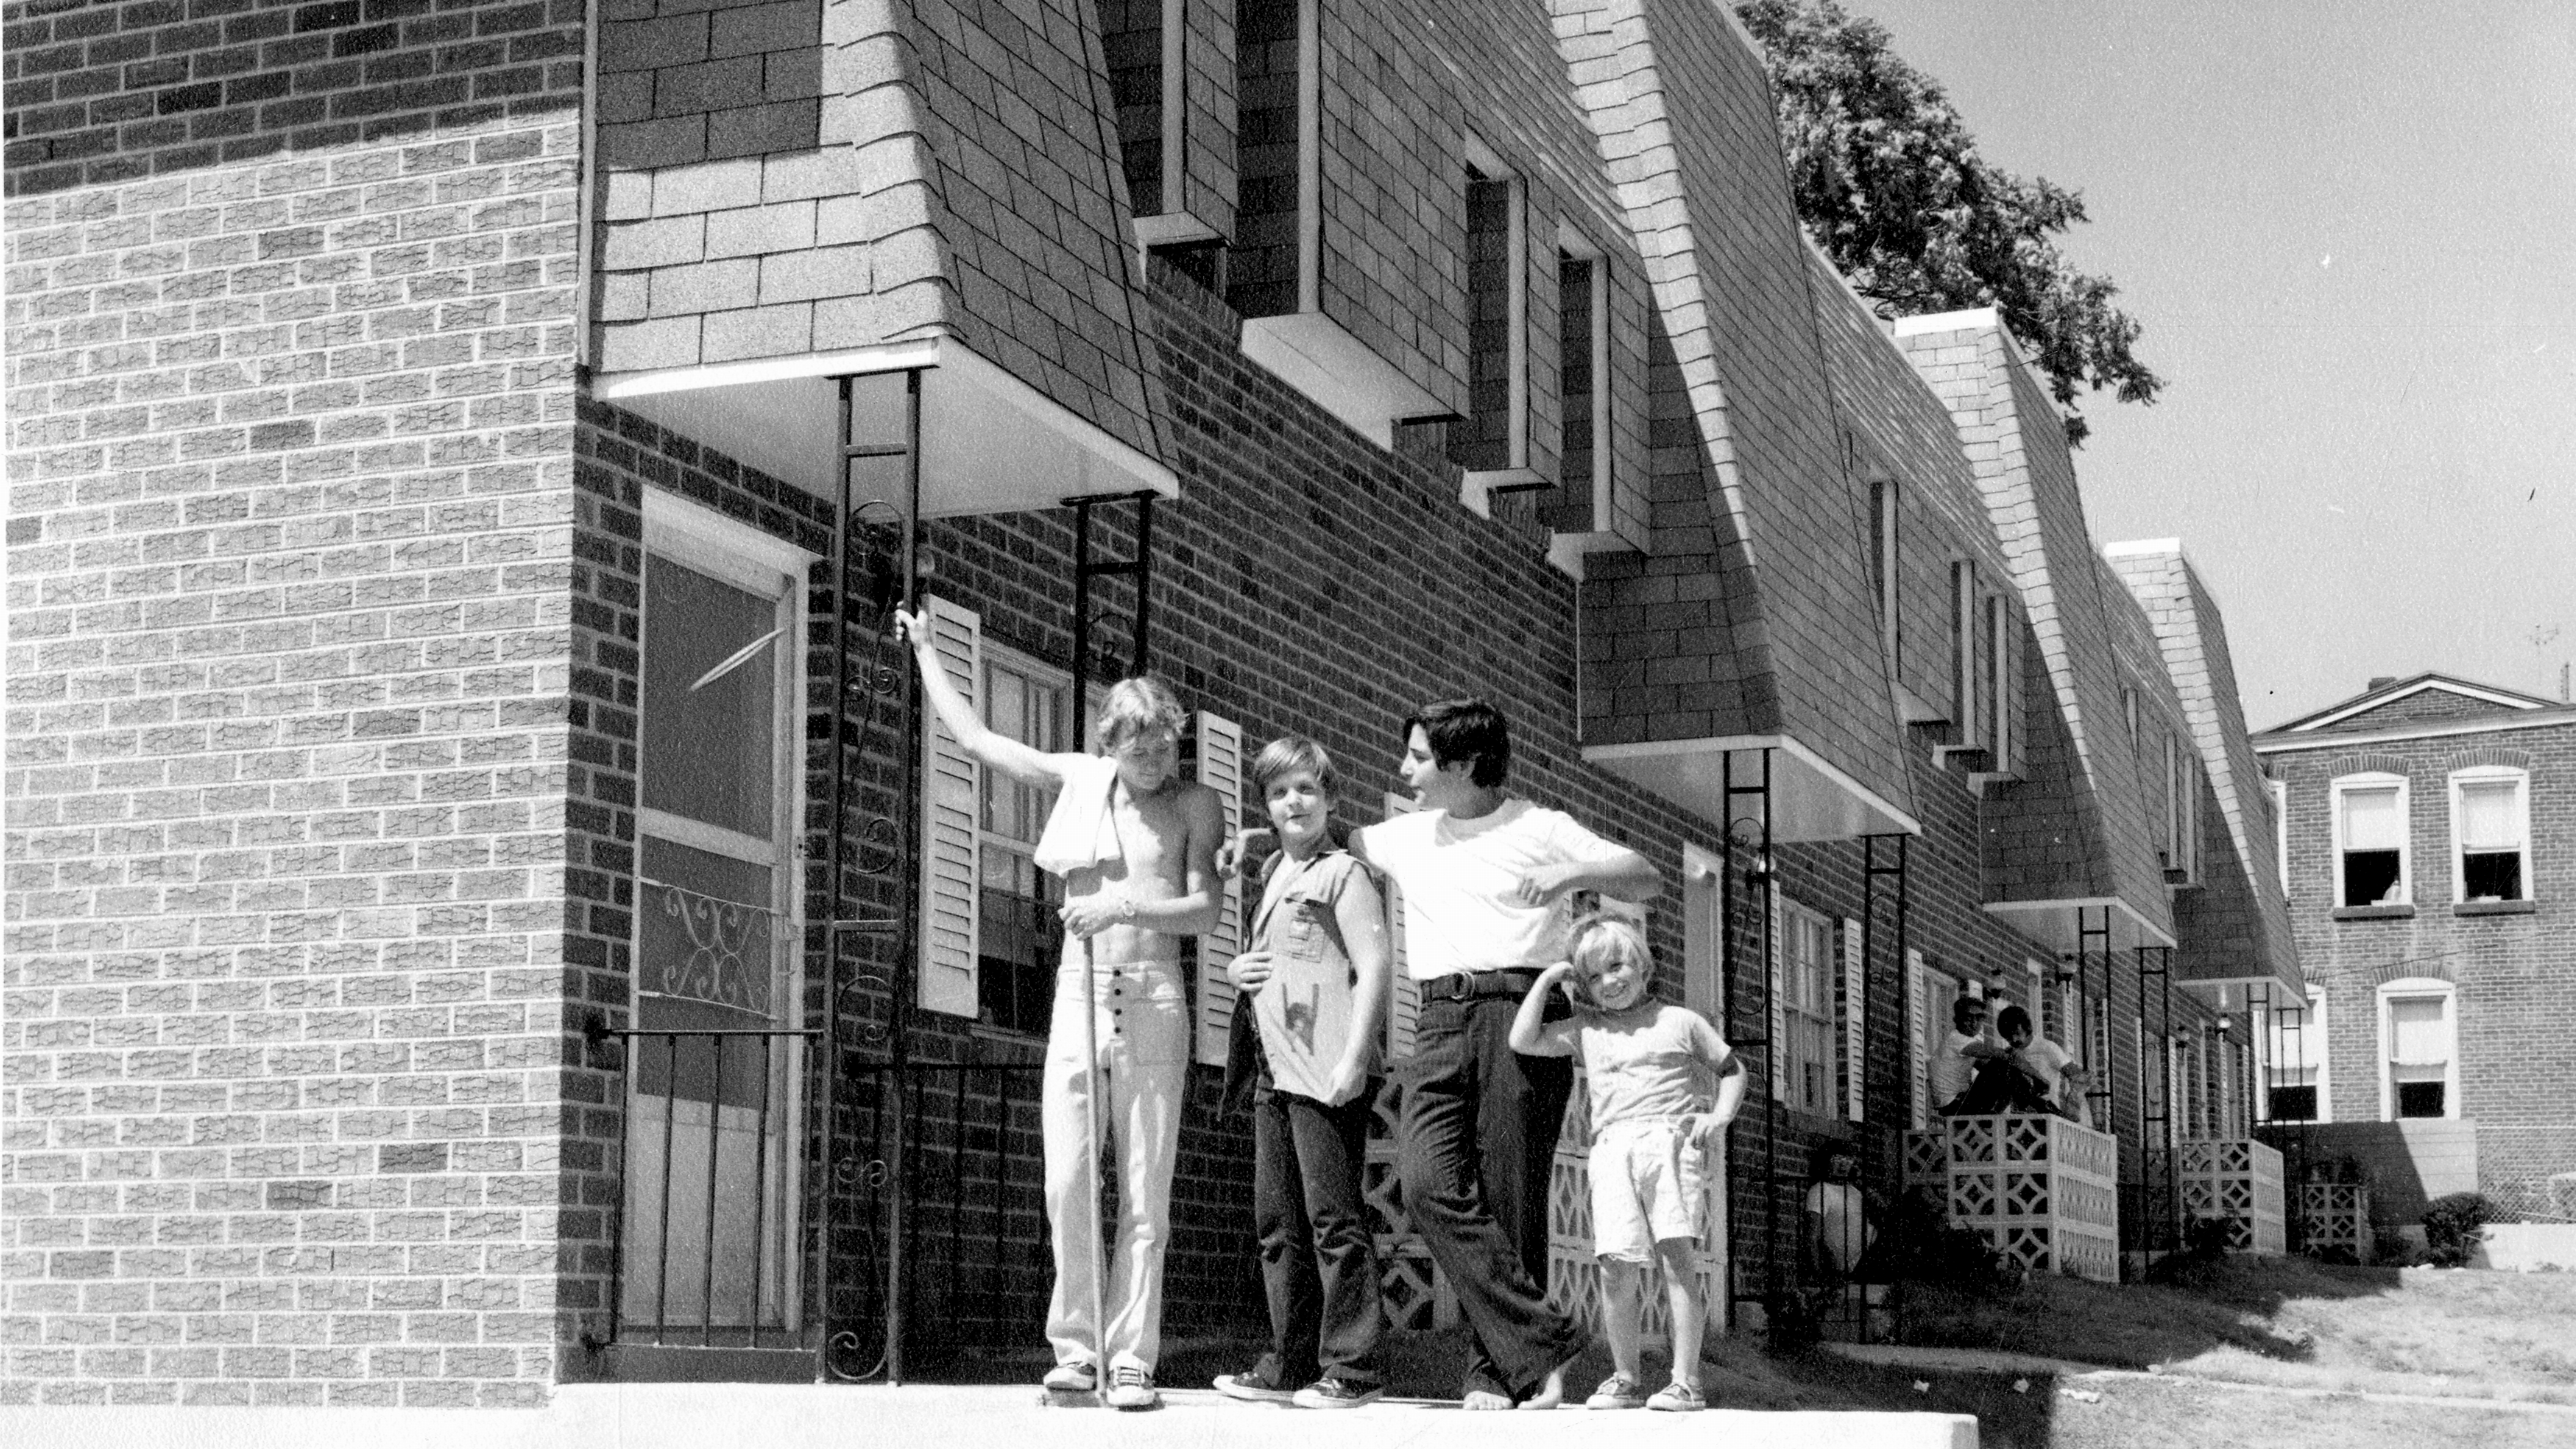 In a black-and-white photo, four people stand together on a sidewalk next to a two-story brick row house with a screen door, shutters, and wrought-iron railings.